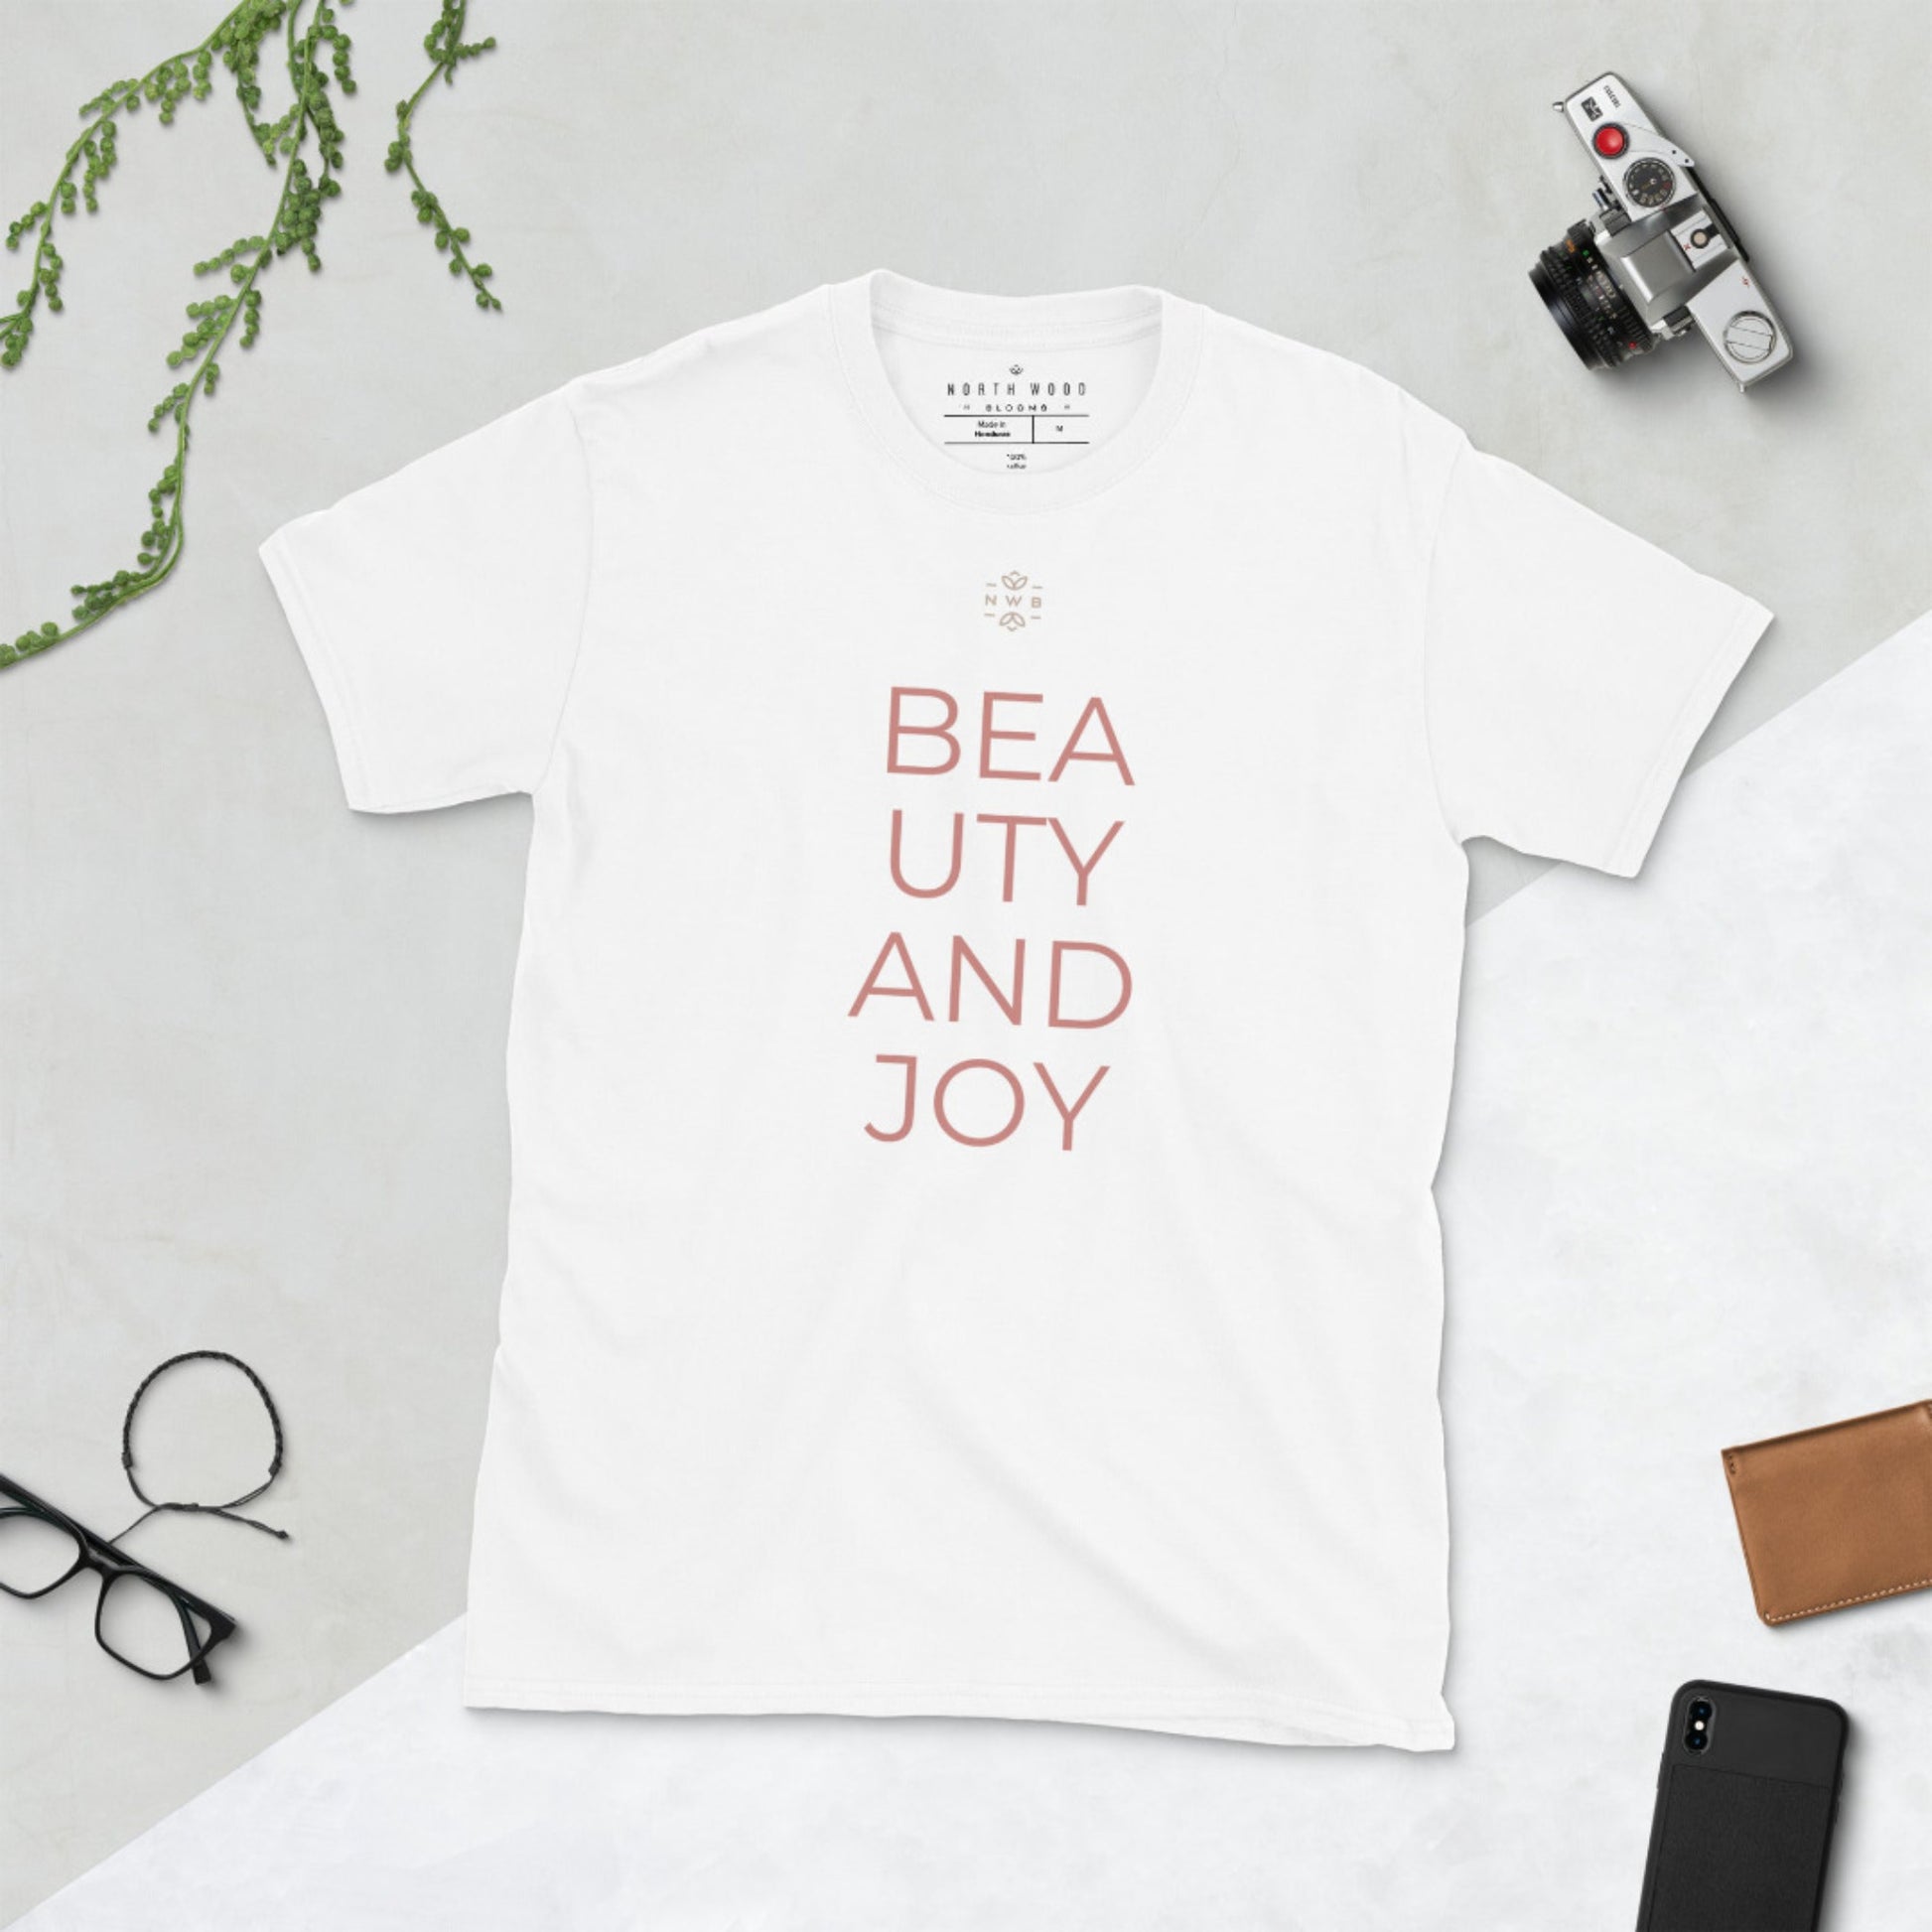 Beauty and Joy T-Shirt for Men and Women